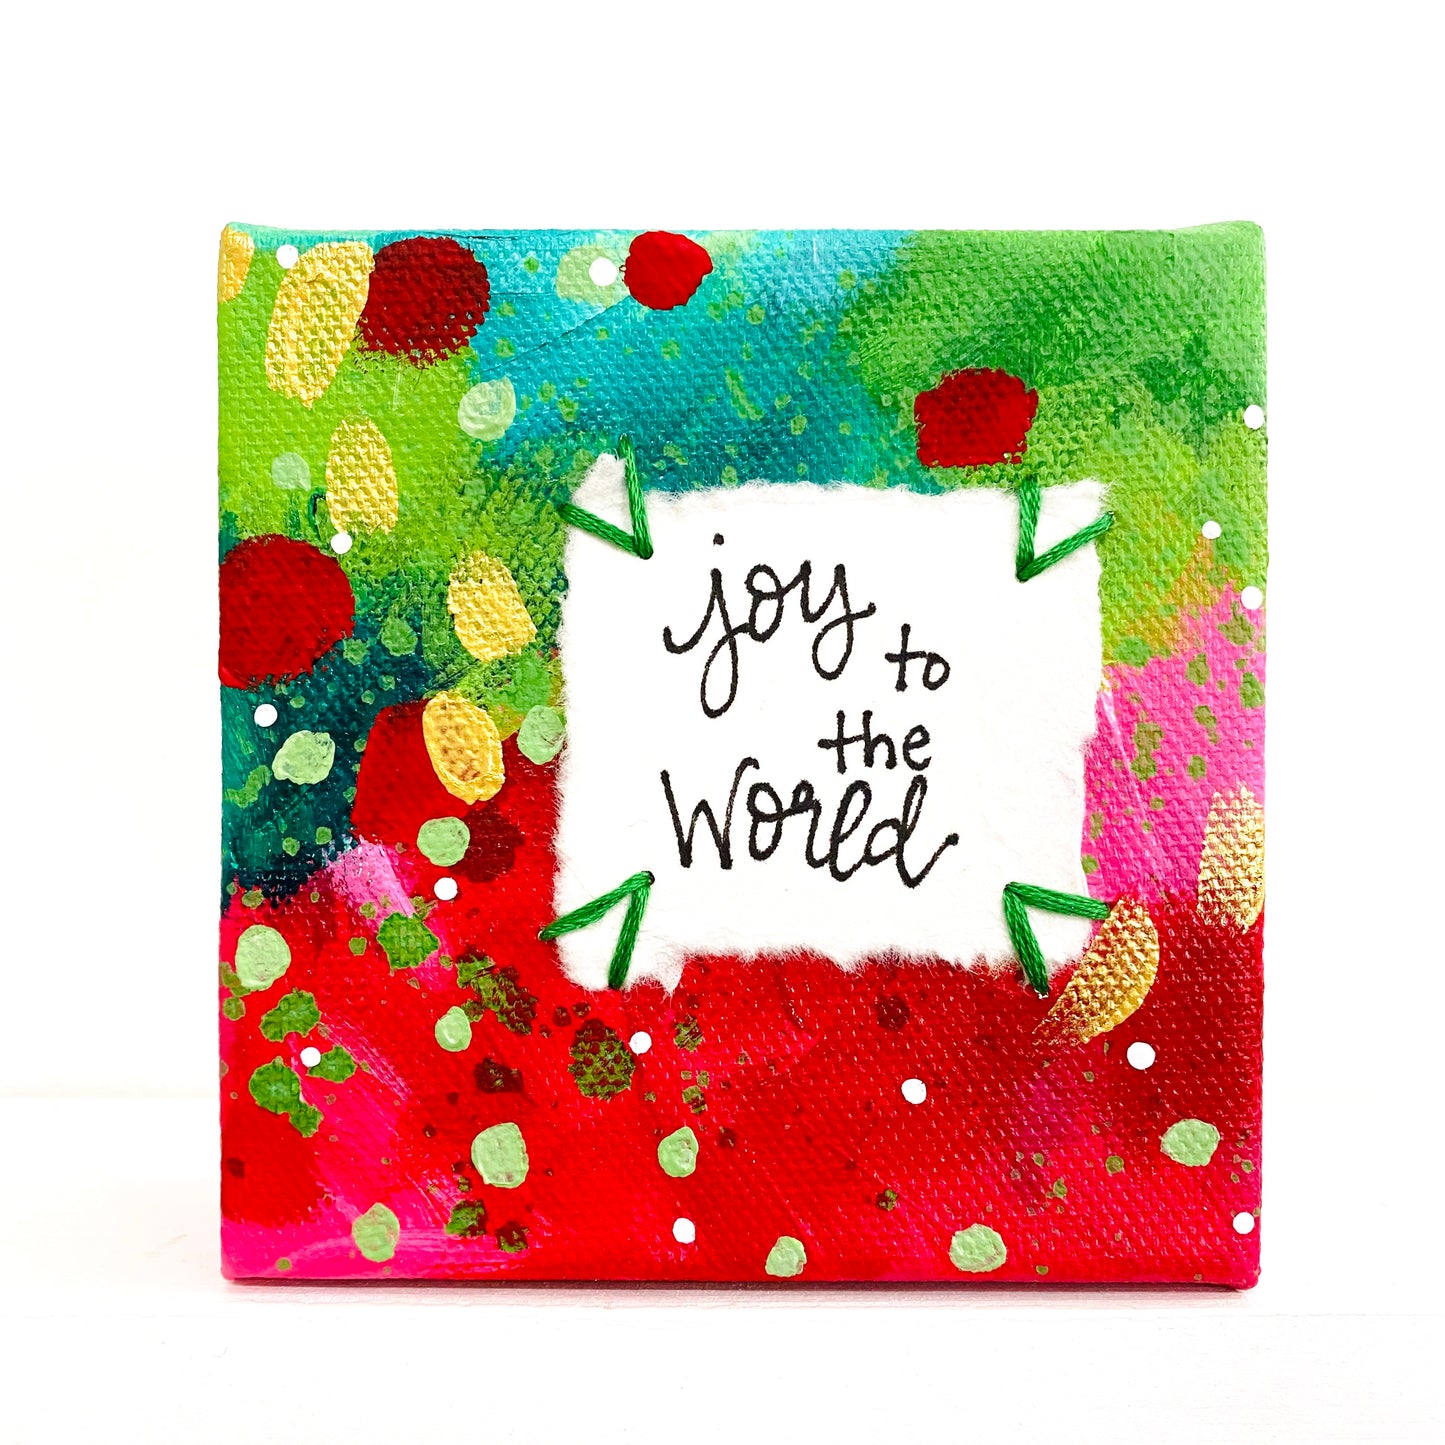 Joy to the World #1 4x4 inch original abstract canvas with embroidery thread accents